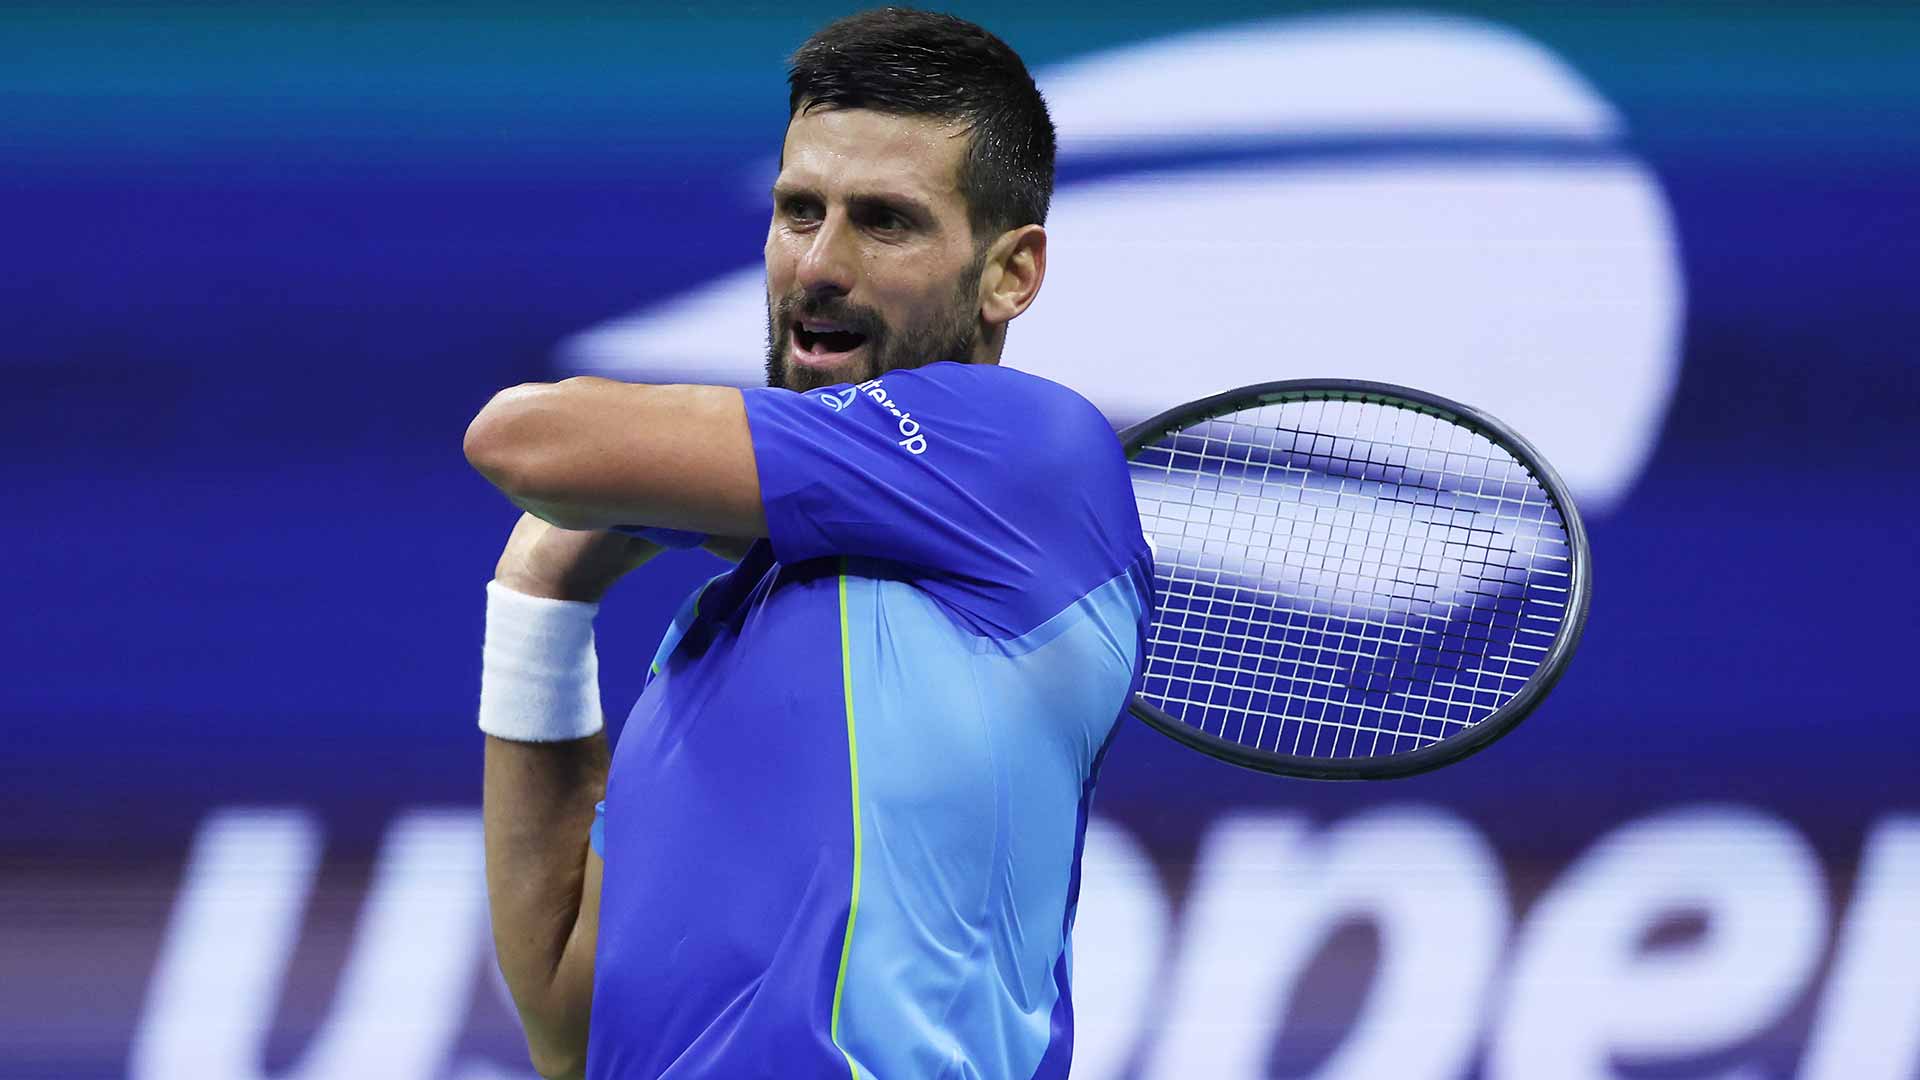 Novak Djokovic begins his quest to reach a record 10th US Open final.